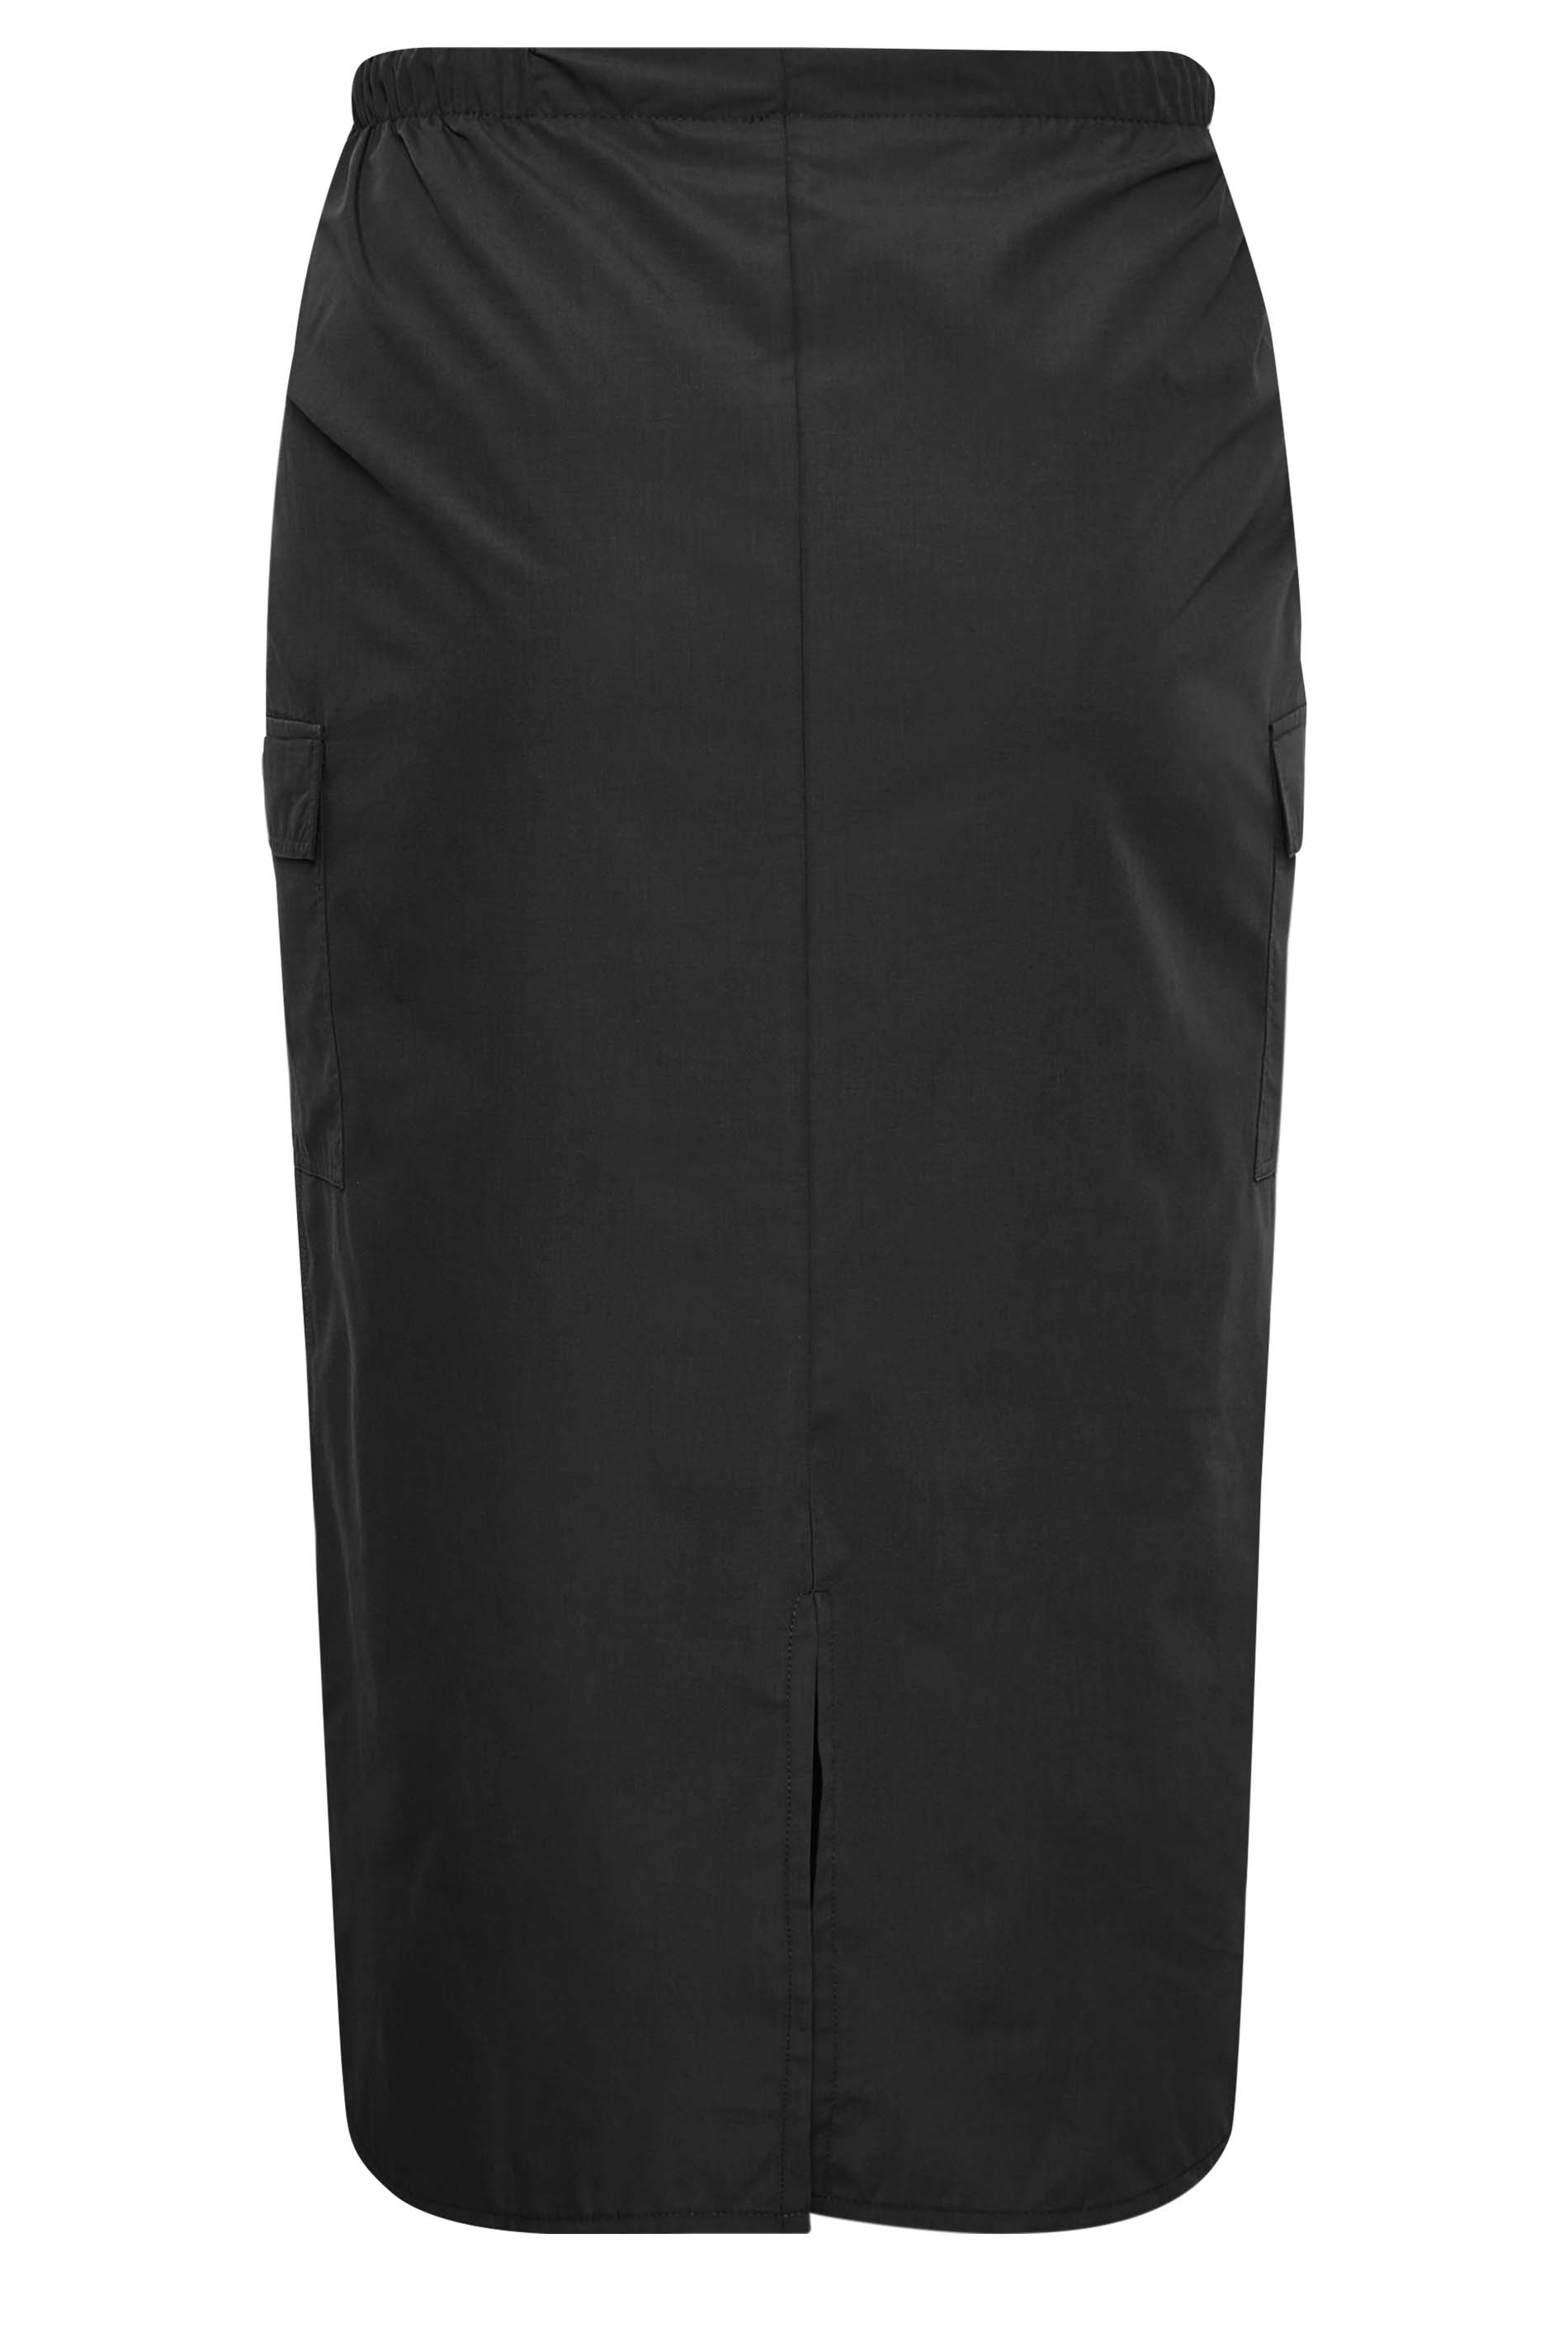 YOURS Plus Size Curve Black Cargo Skirt | Yours Clothing